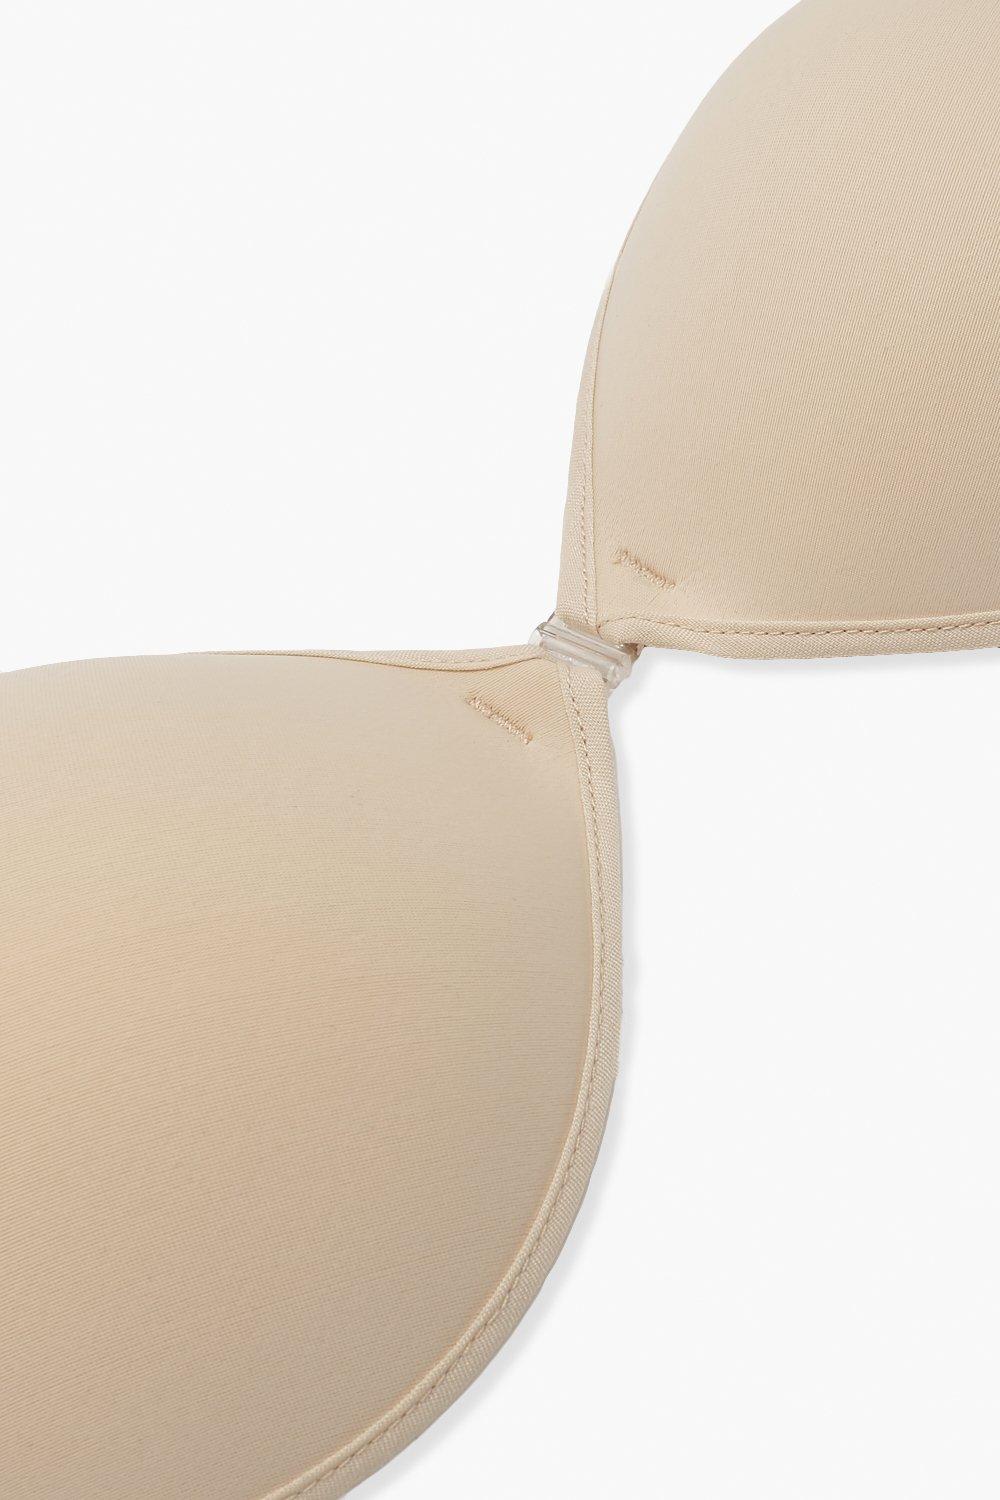 Bralux Australia  Desirable backless and stick on bra solutions A